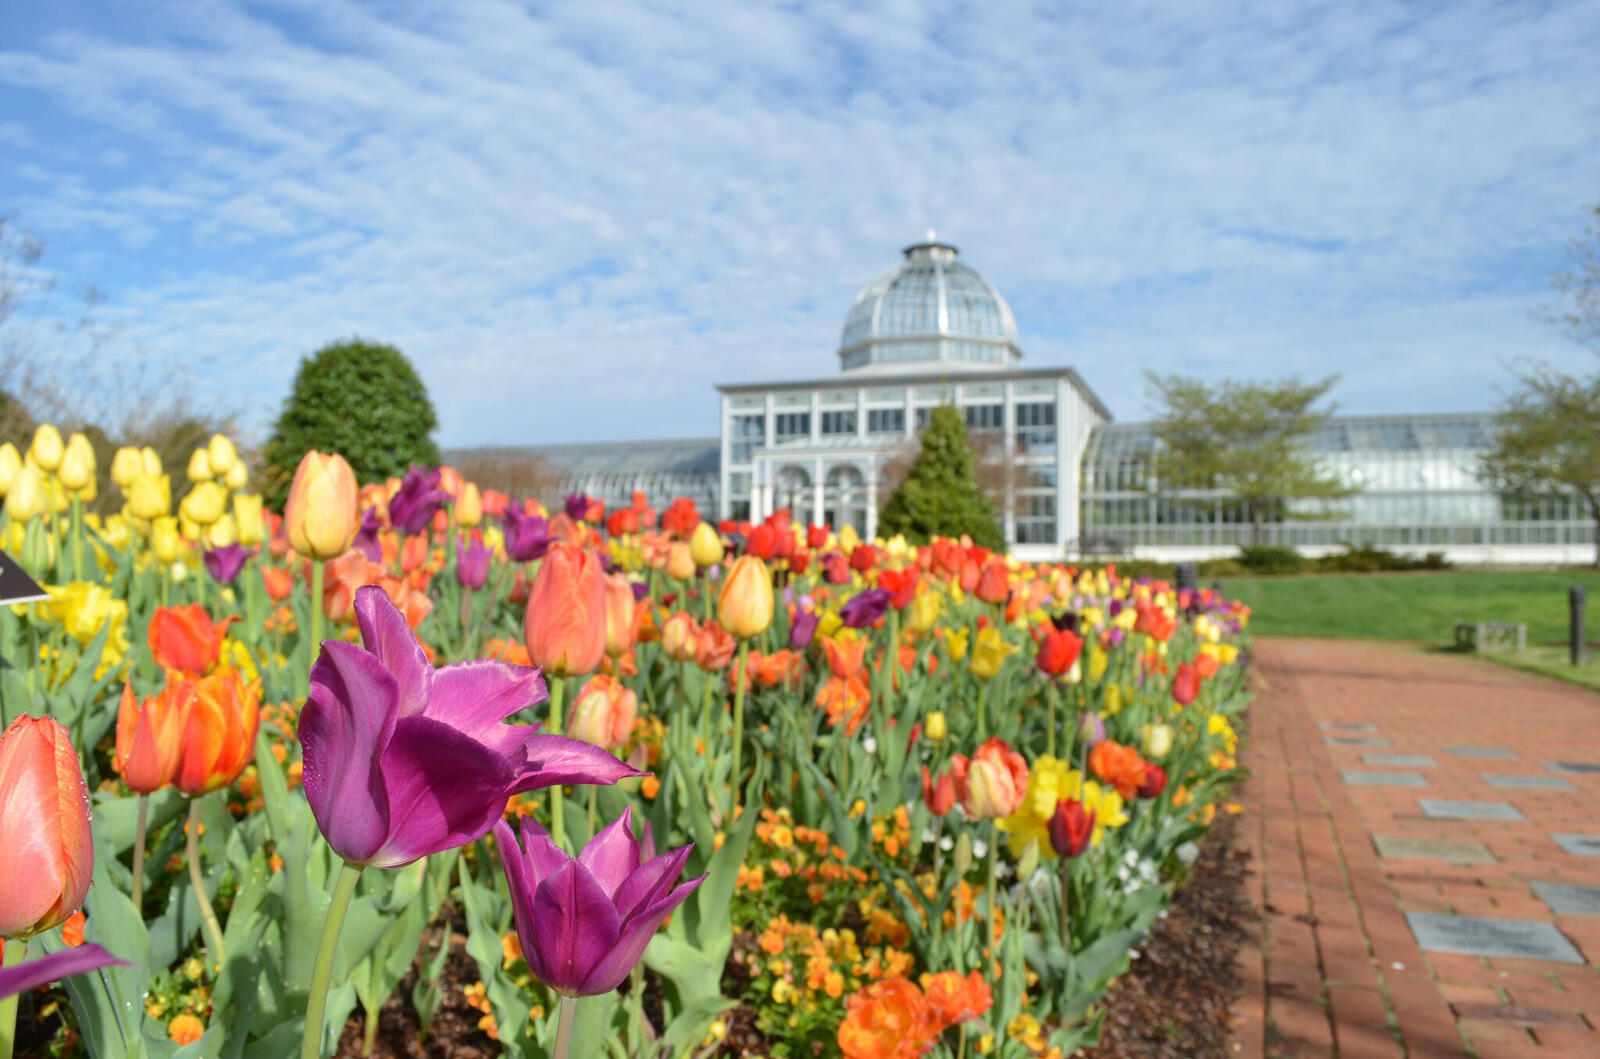 VCU Health seminars at Lewis Ginter Botanical Garden are free and open to the public, but registration is recommended. The seminars also are streamed live on the VCU Health Facebook page. (Courtesy photo)